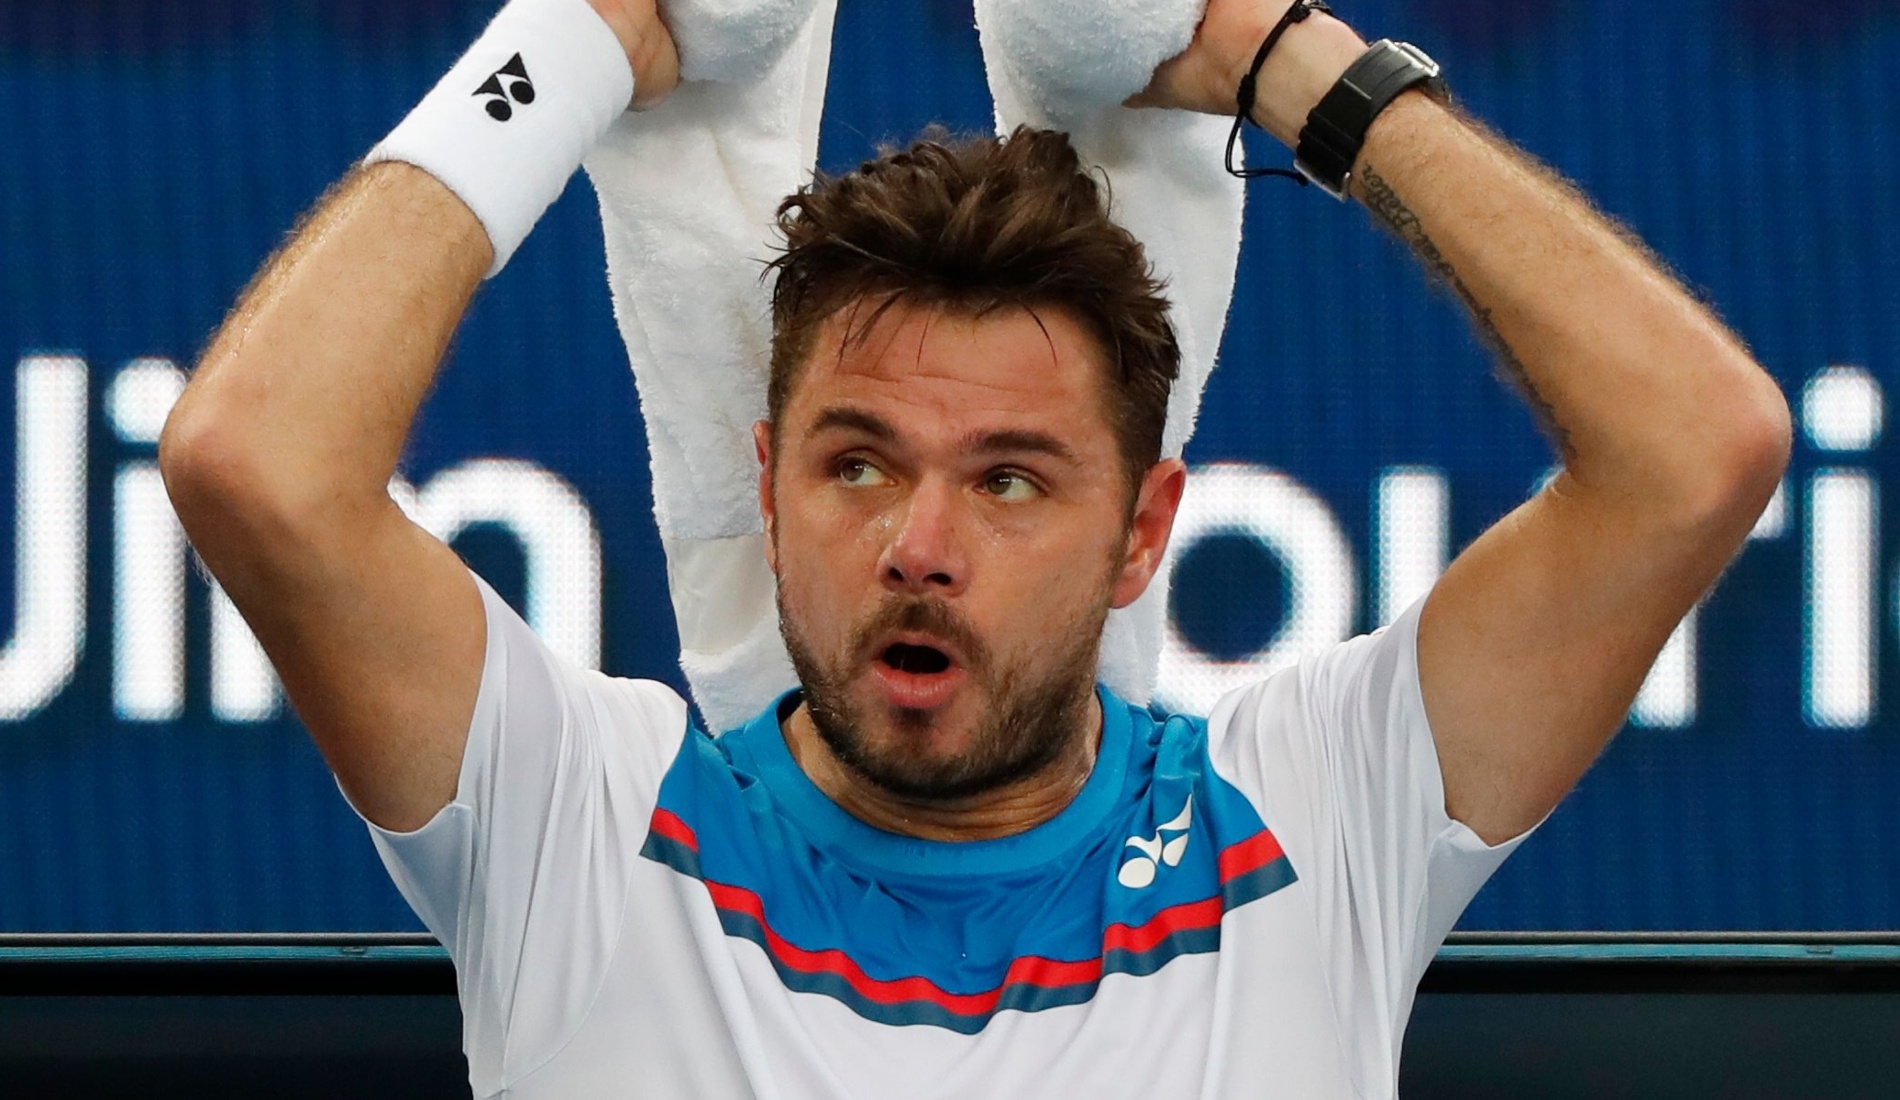 Stan Wawrinka during a change-over at the 2020 Australian Open